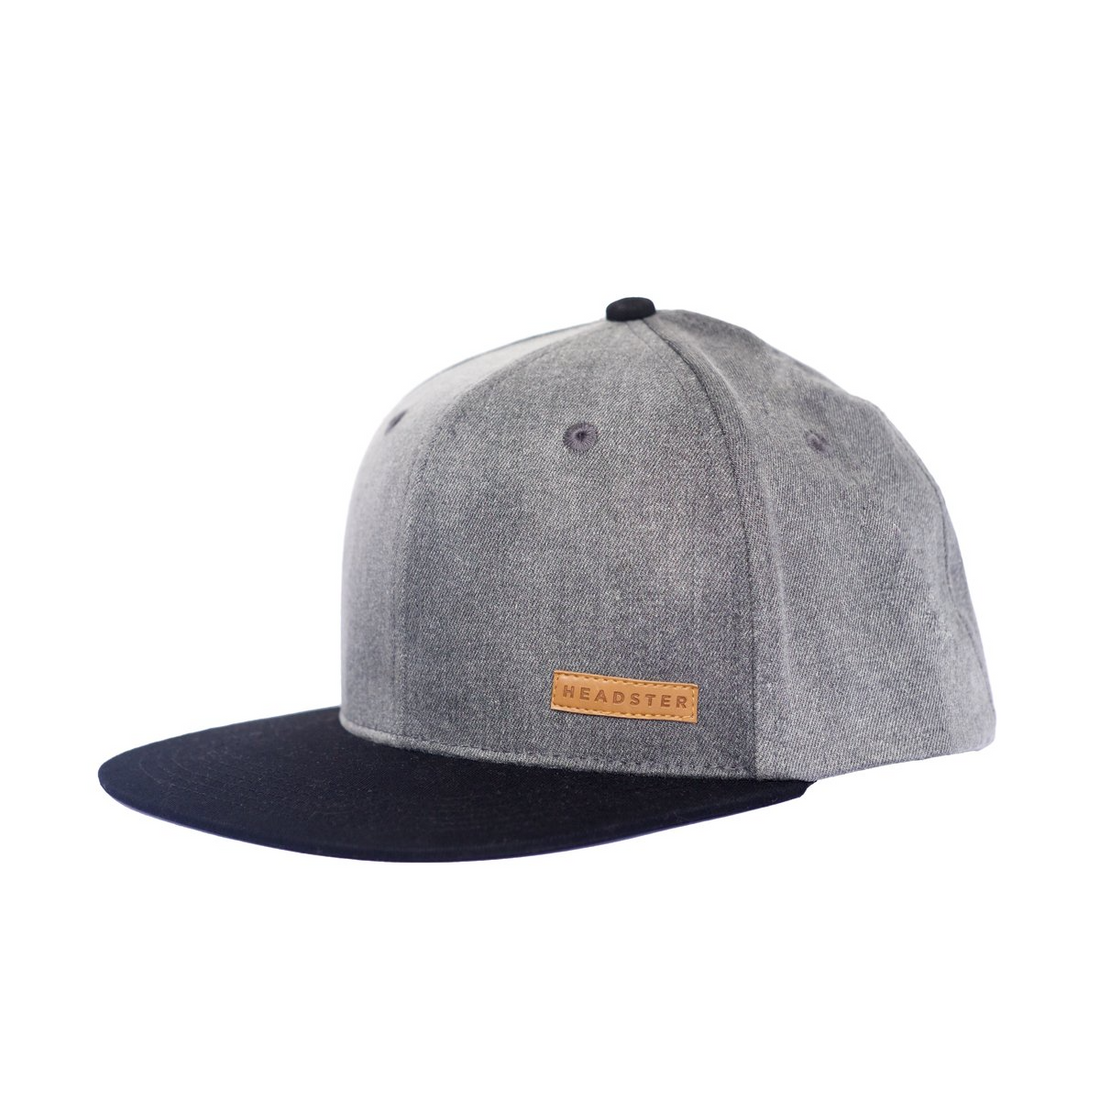 Stacked Up - Casquette snapback pour Homme